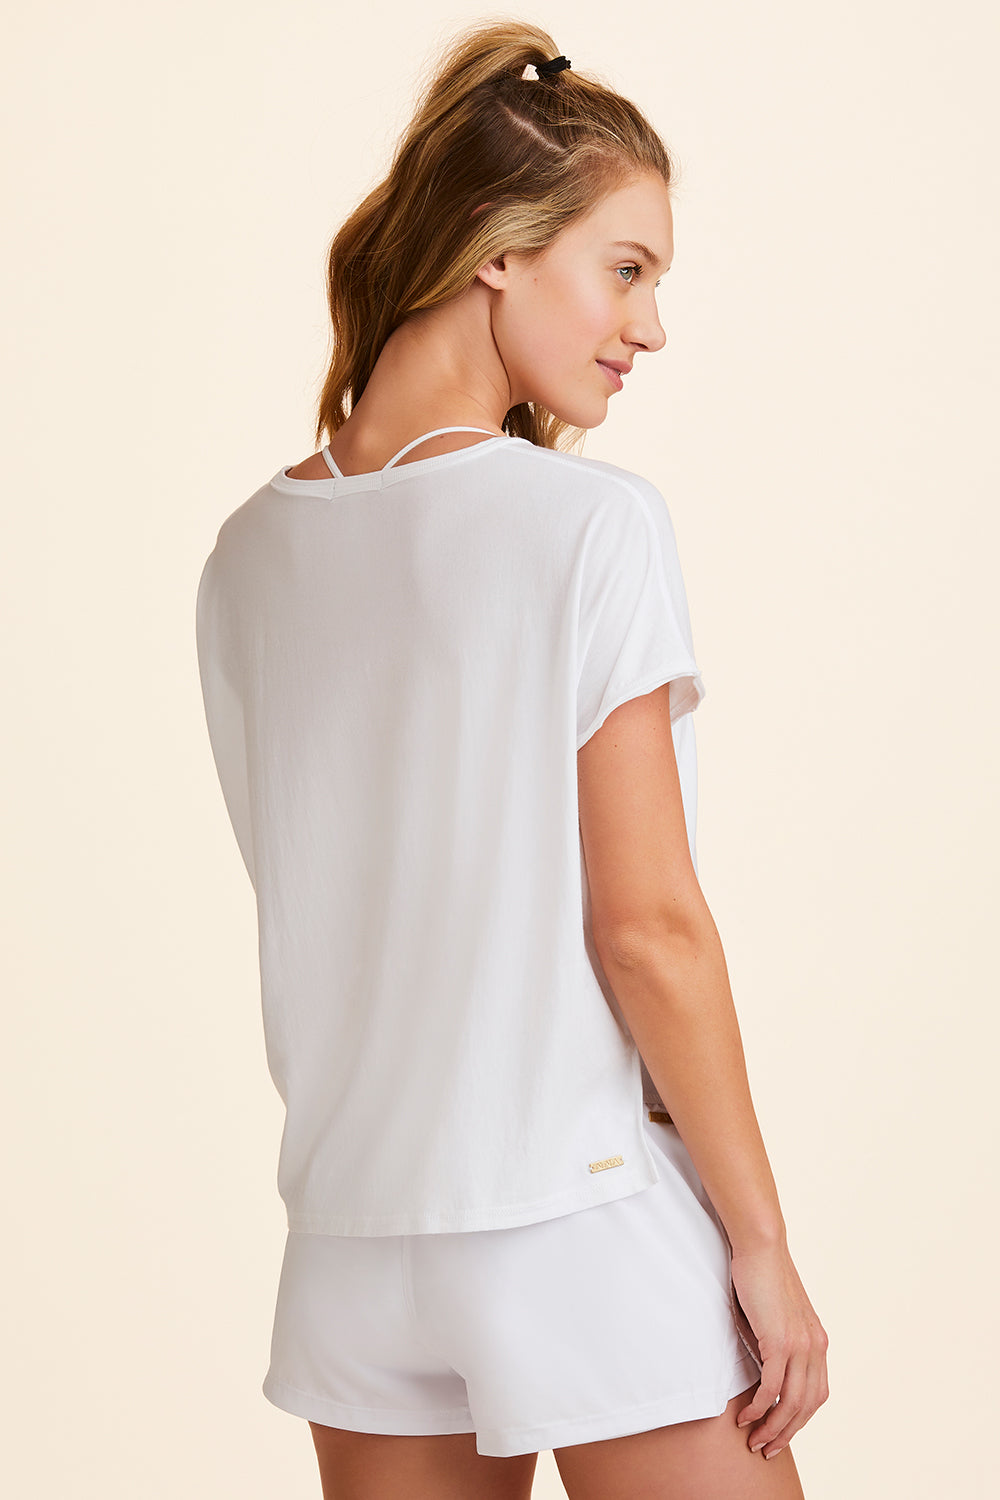 Back view of Alala Women's Luxury Athleisure super-soft tee in solid White